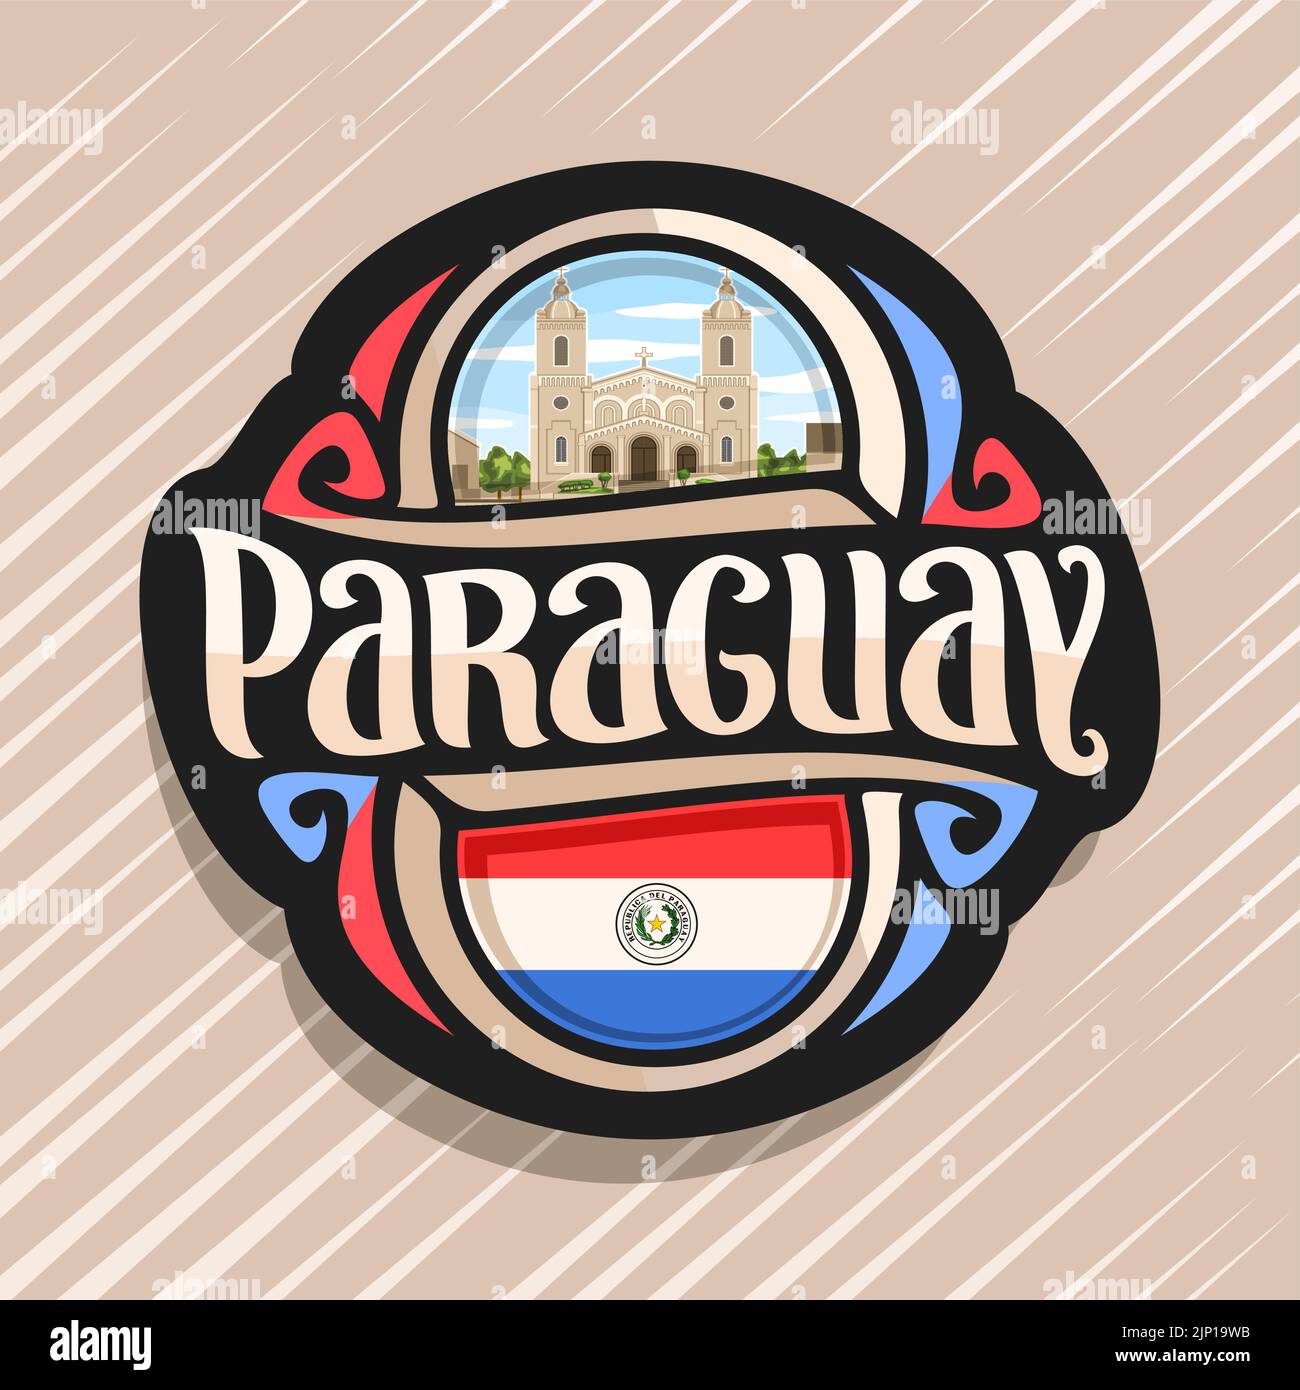 Vector logo for Paraguay country, fridge magnet with paraguayan flag, original brush typeface for word paraguay and national paraguayan symbol - Cathe Stock Vector